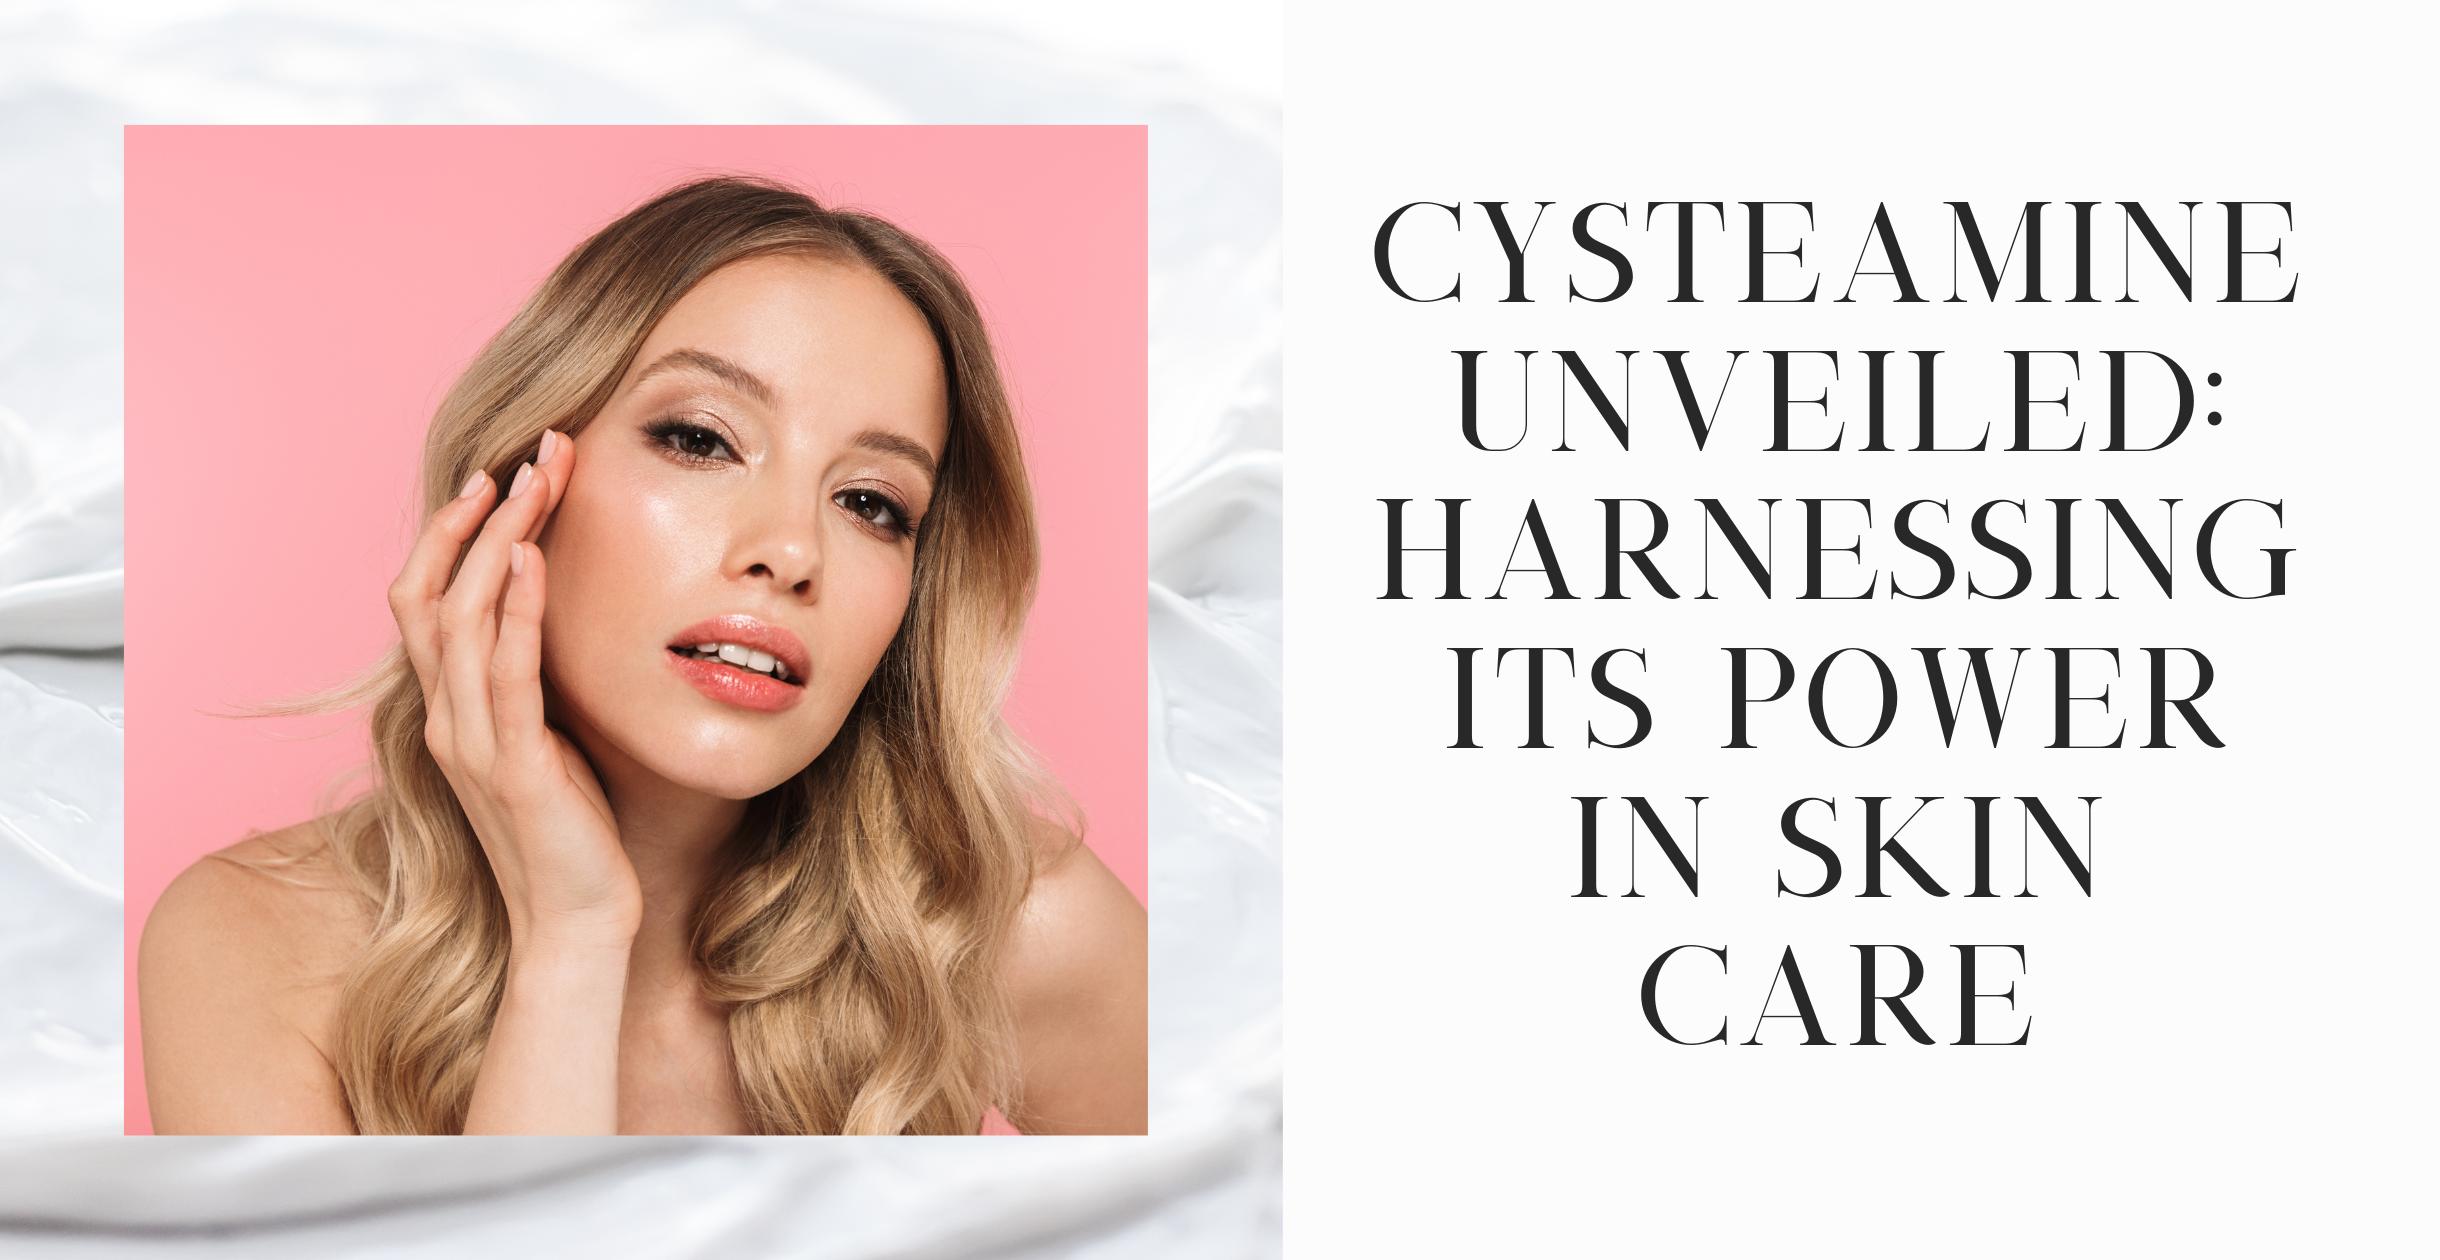 Cysteamine Unveiled: Harnessing Its Power in Skin Care